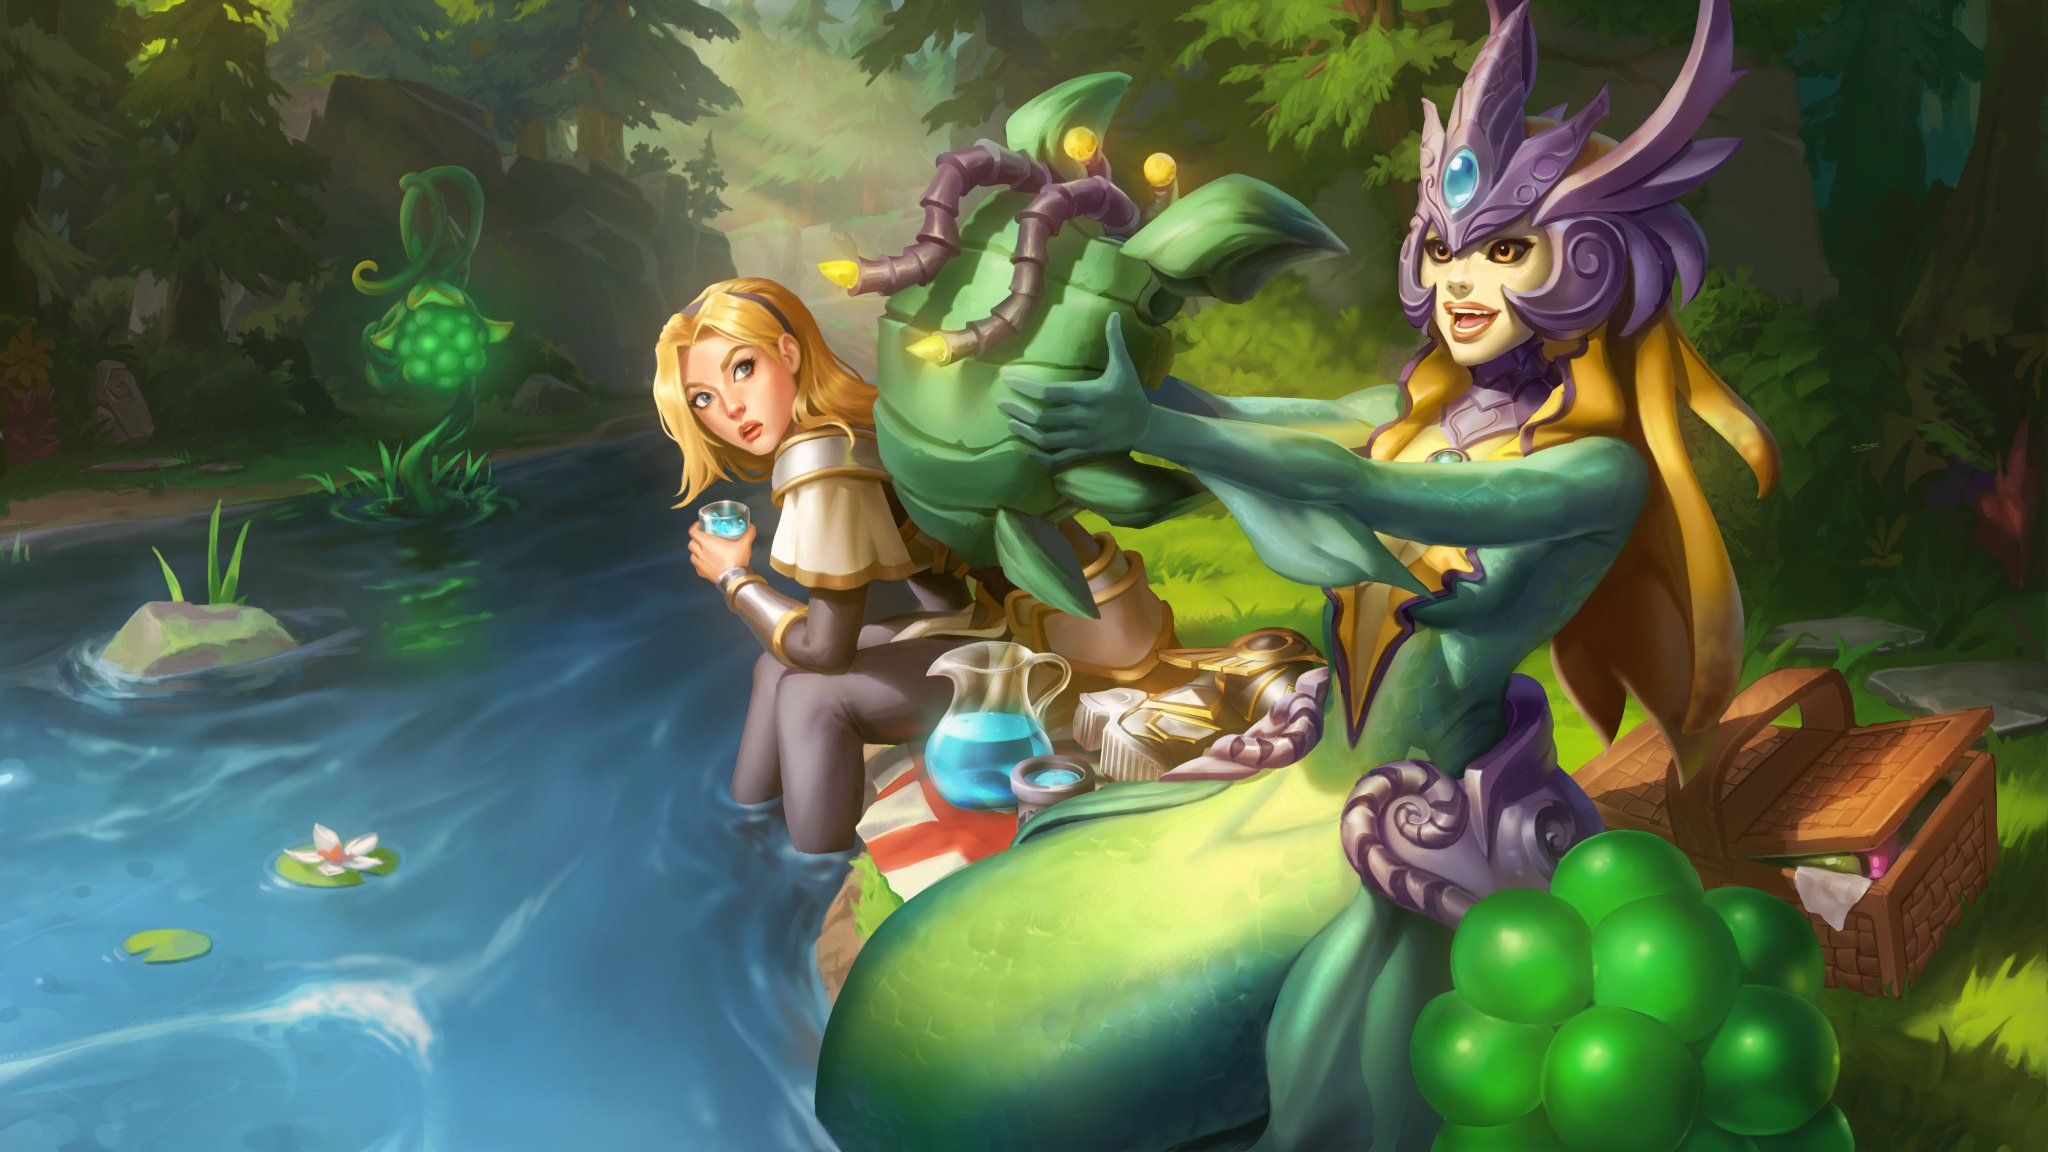 League of Legends: Wild Rift rivers that cutrt of Wild Rift are a great place to chill with a friend and a pitcher of iced Scryer's